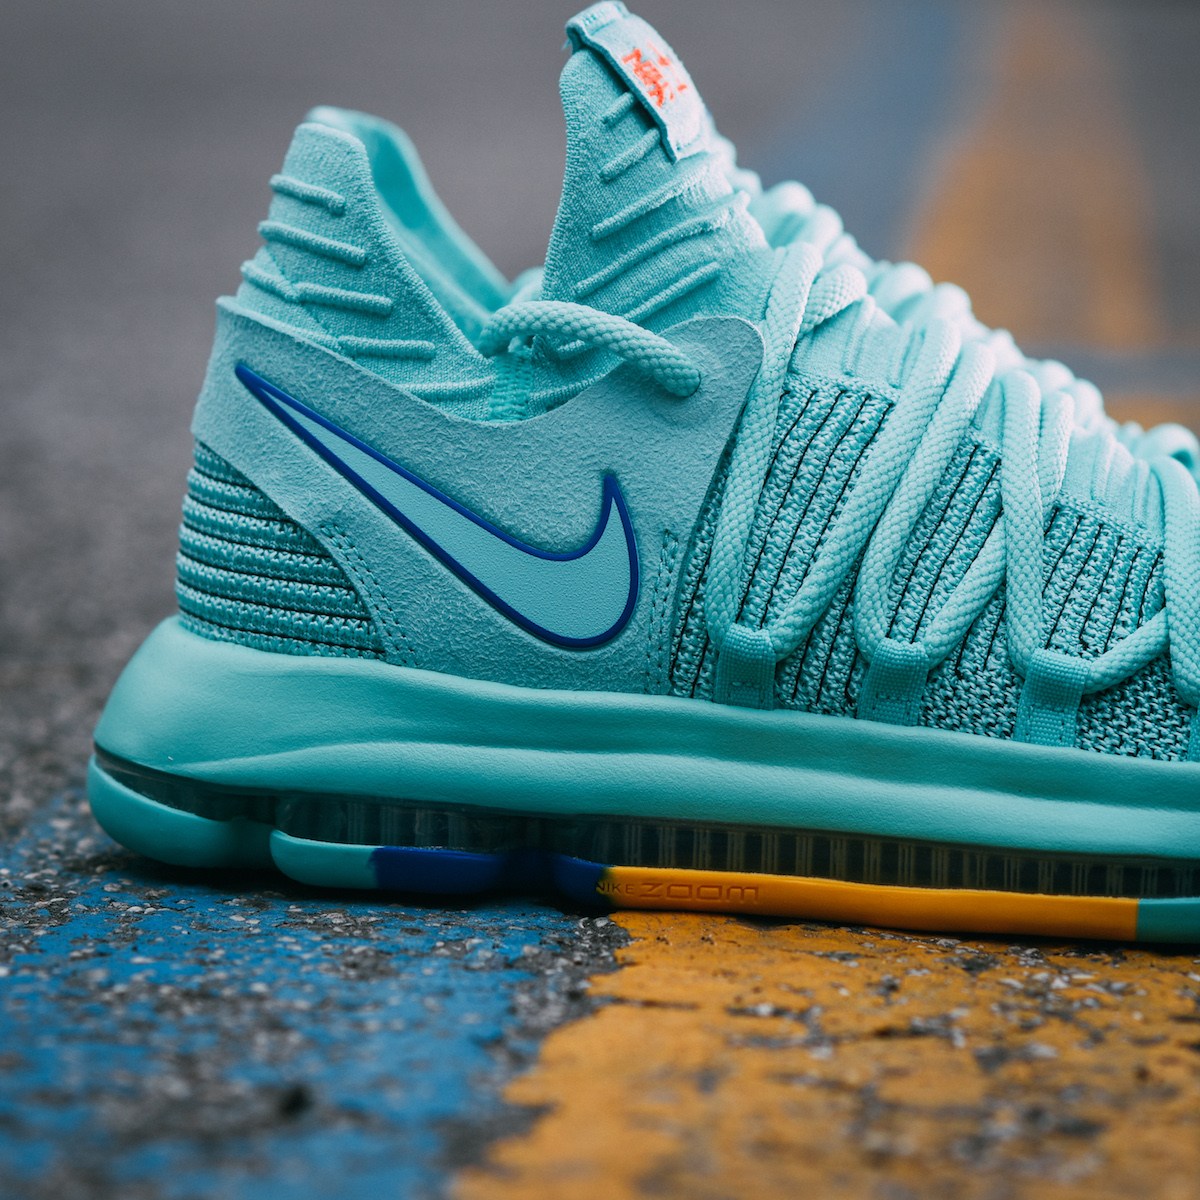 kd x turquoise